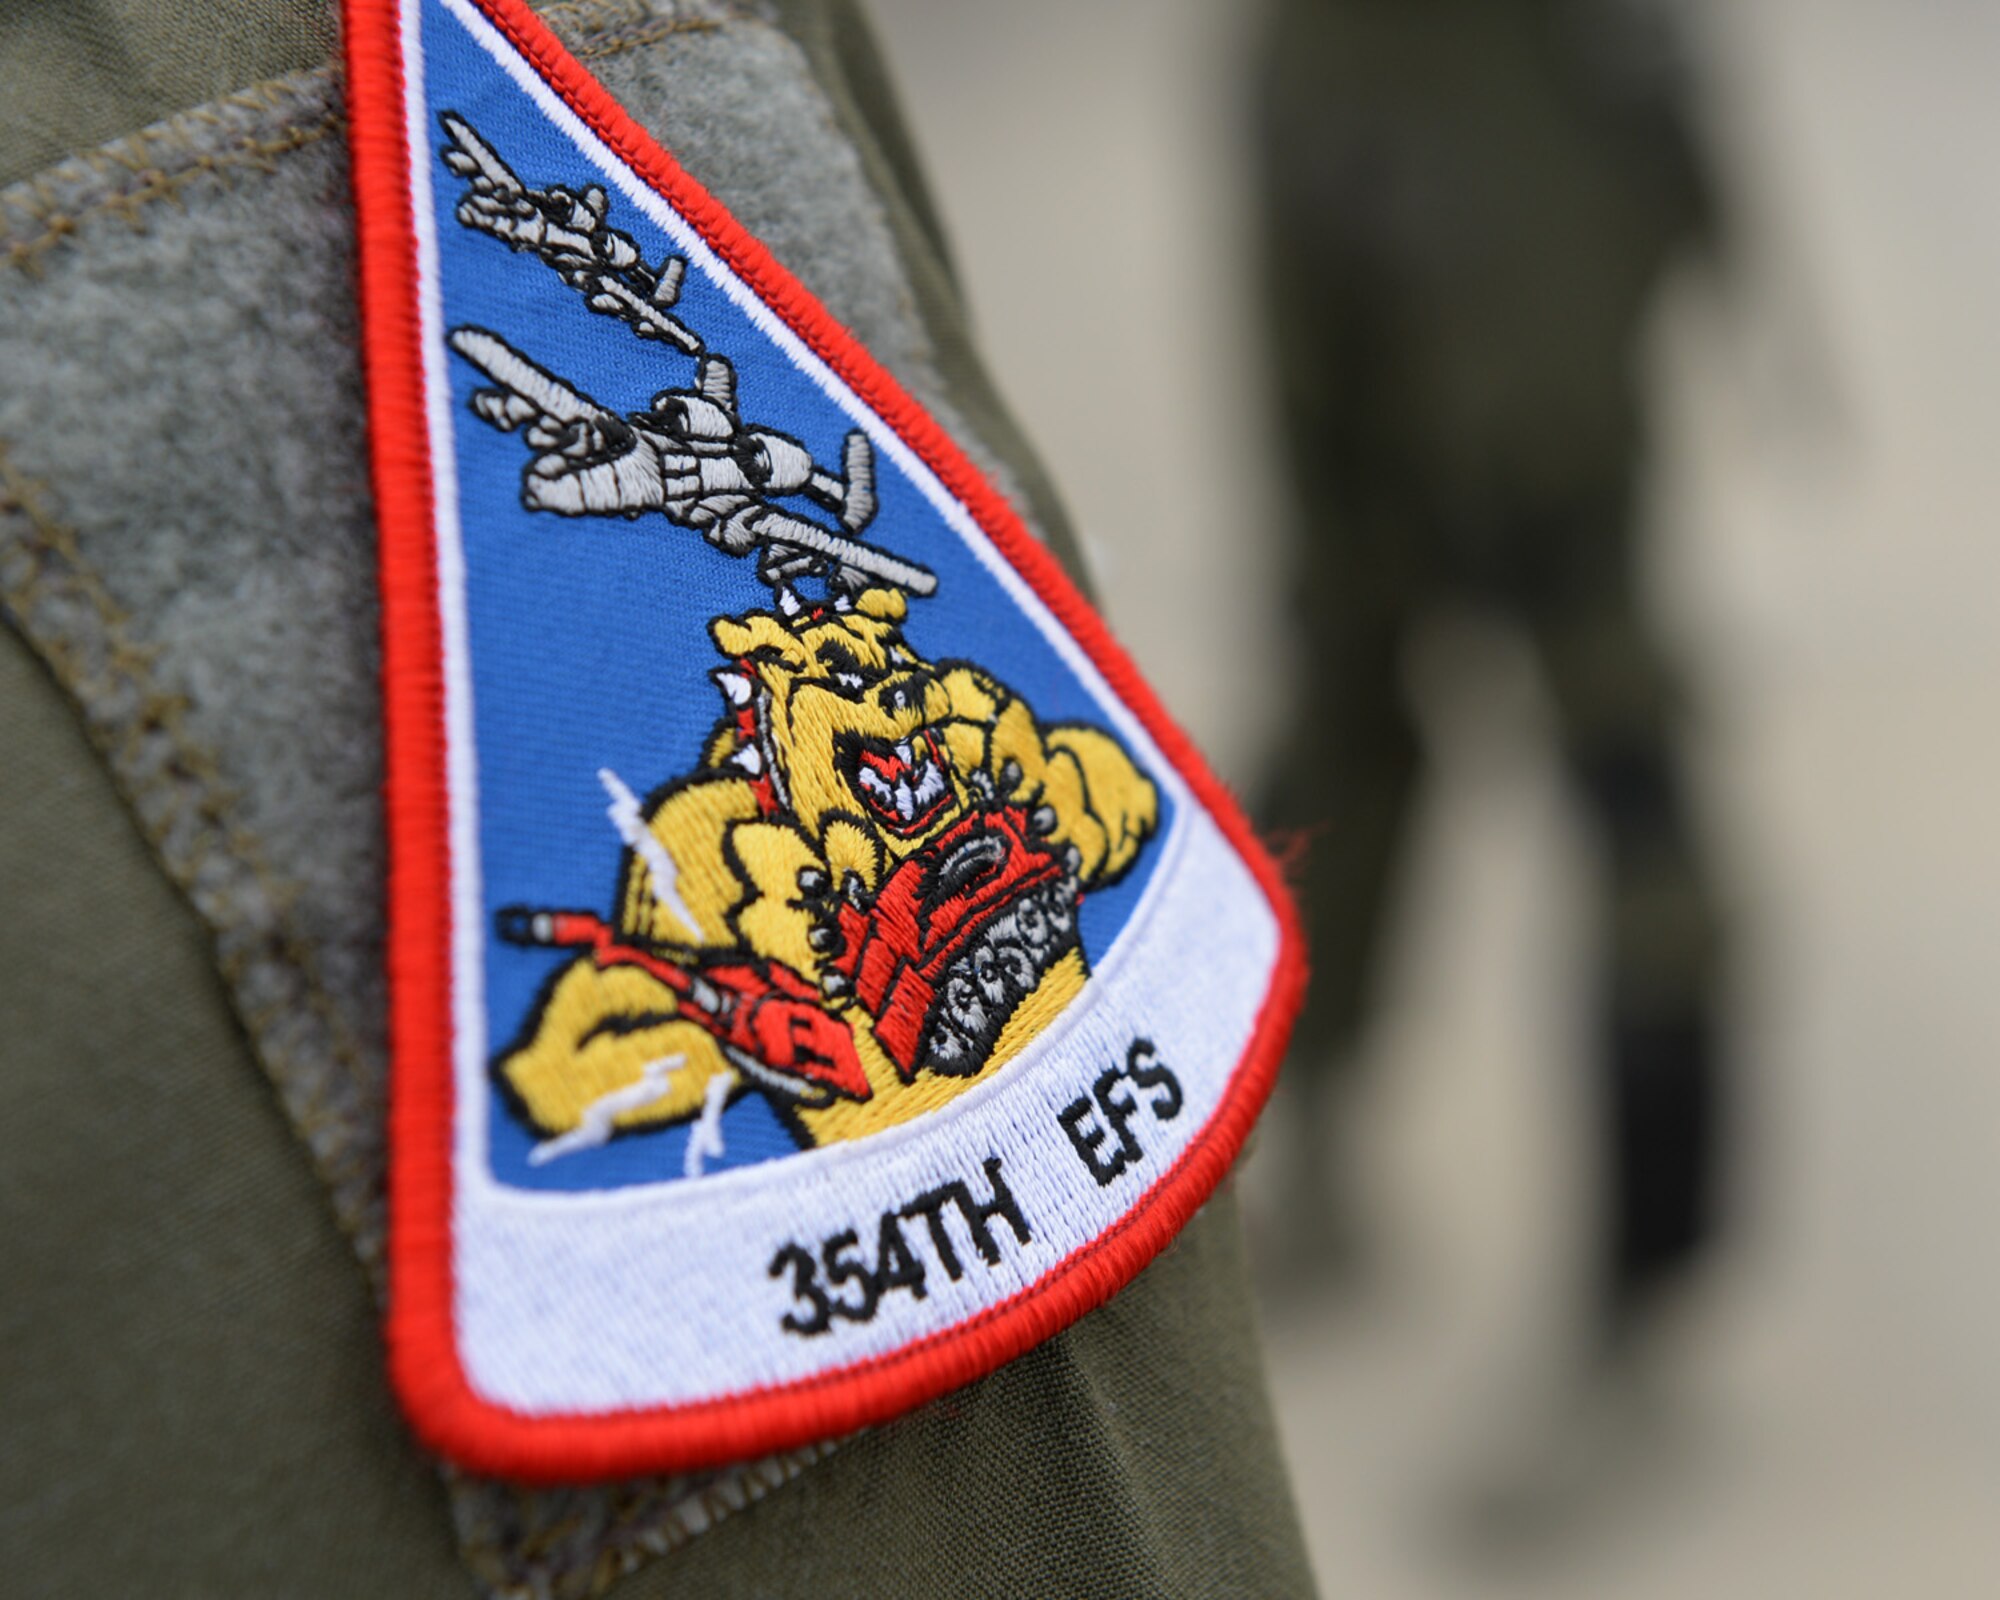 A 354th Expeditionary Fighter Squadron patch is displayed during a theater security package deployment at Sliac Air Base, Slovakia, May 22, 2015. The aircraft deployed to Slovakia in support of Operation Atlantic Resolve to bolster air power capabilities while underscoring the U.S. commitment to European security and stability. (U.S. Air Force photo by Senior Airman Dylan Nuckolls/Released)